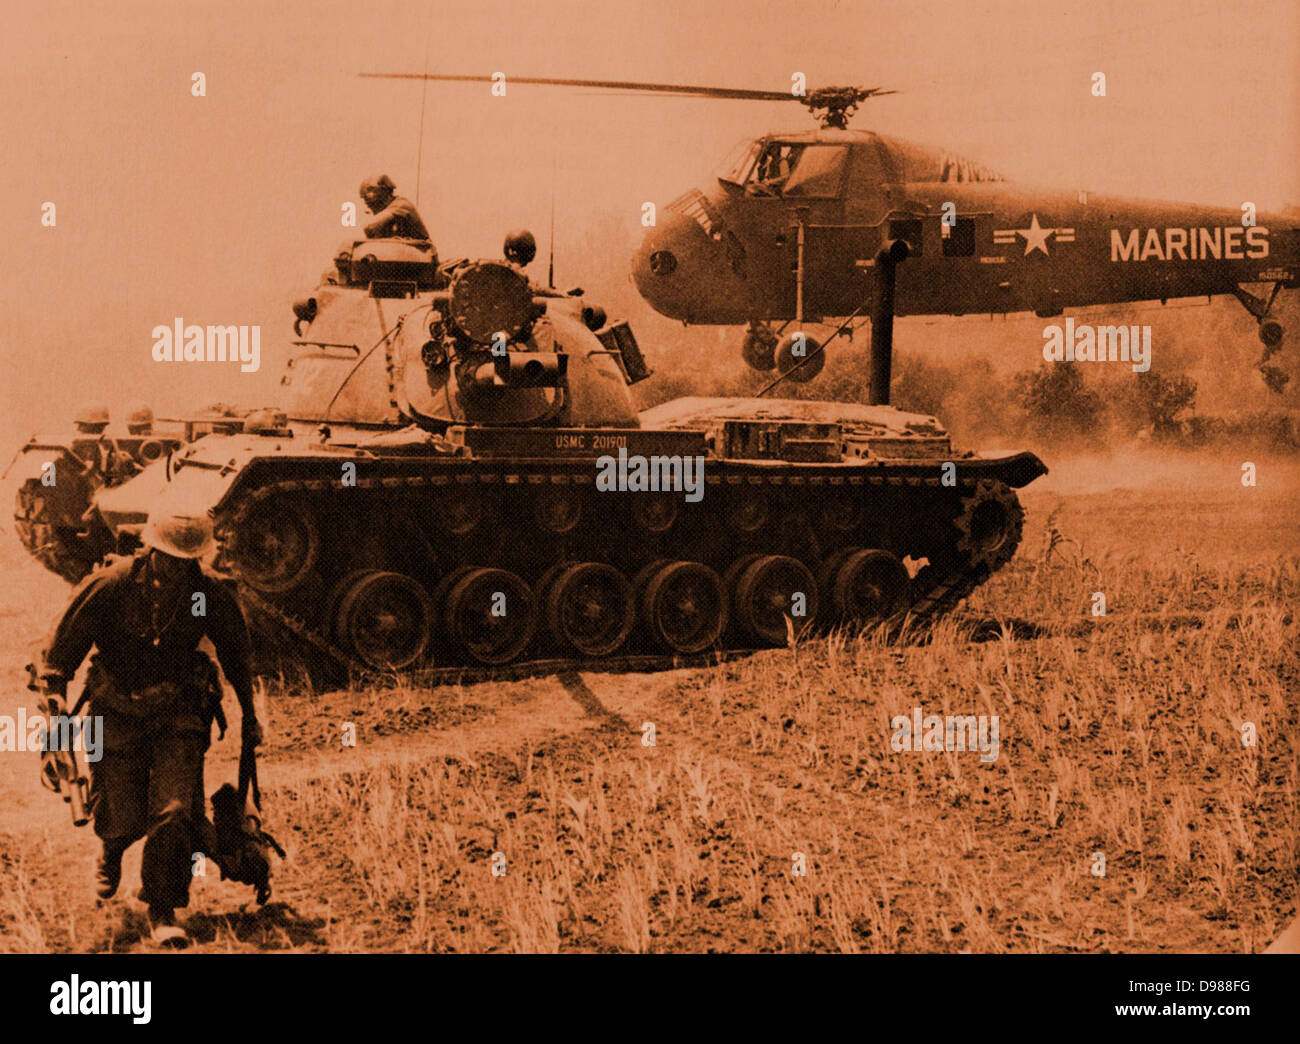 Vietnam War 1964-1975 A-us-mag-16-helicopter-evacuates-starlite-casualties-while-a-marine-D988FG